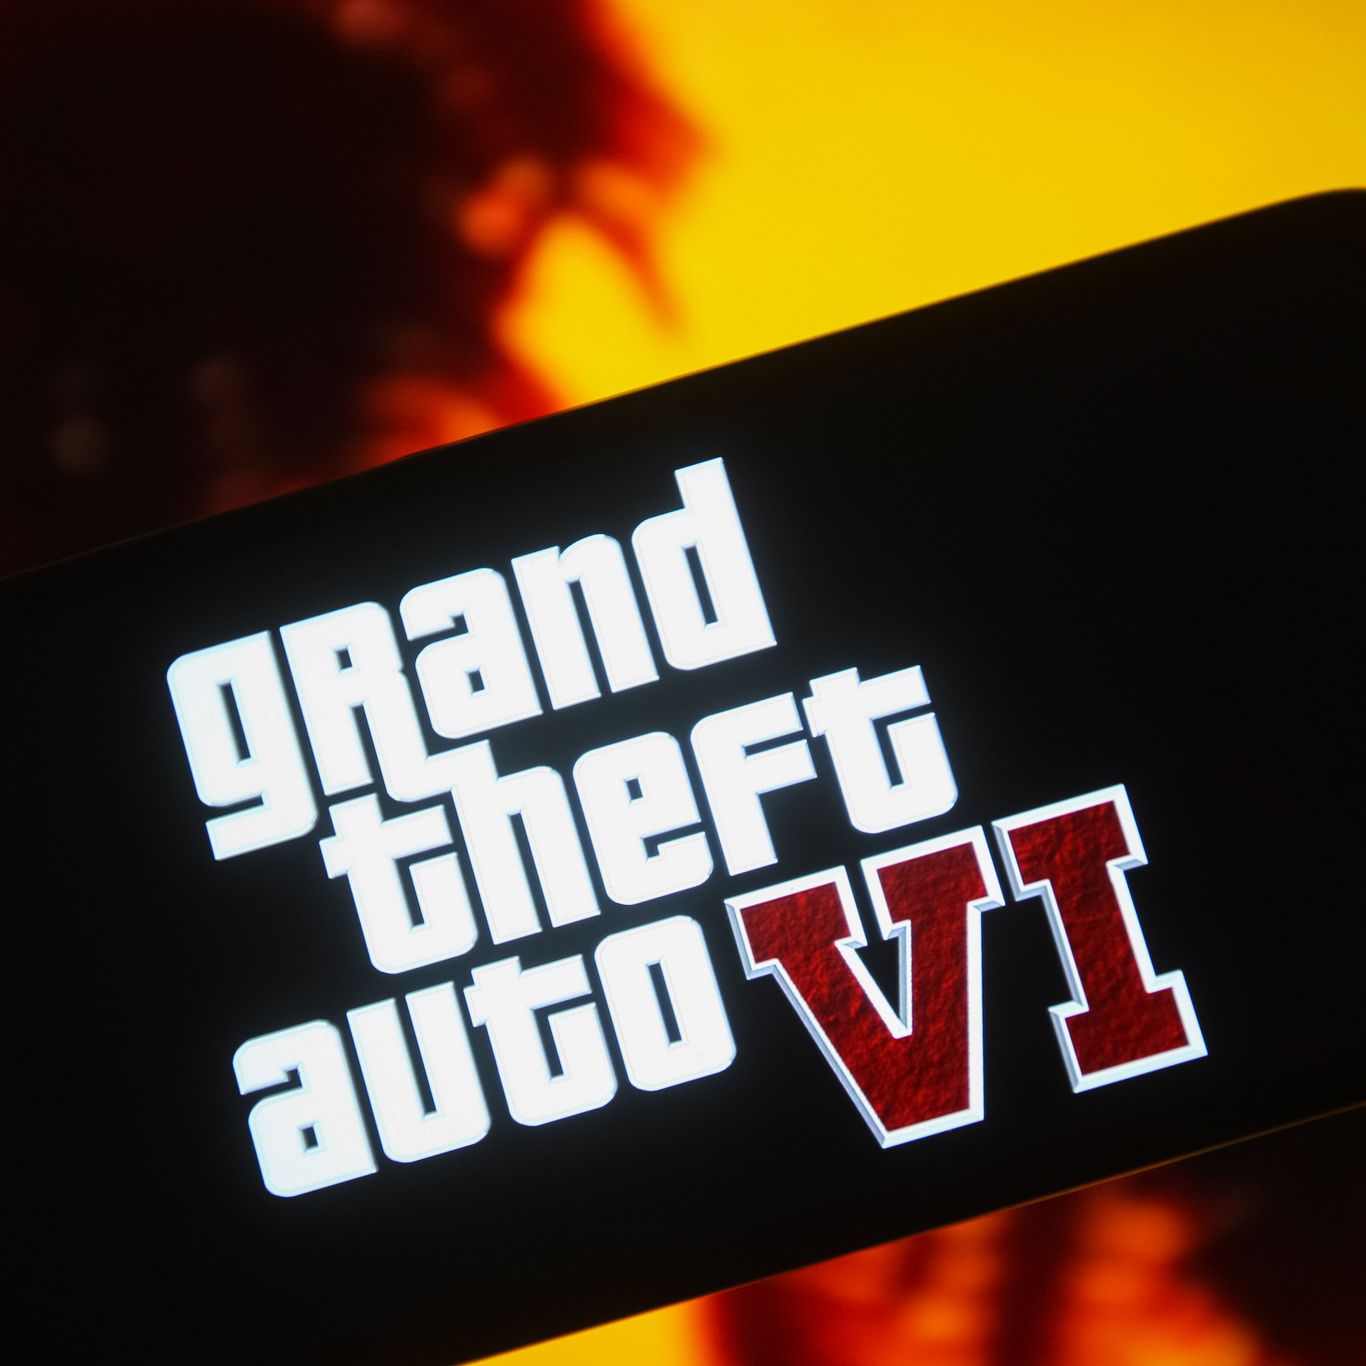 Grand Theft Auto VI (GTA6) Leak Is a Shock to Rockstar Games - Bloomberg